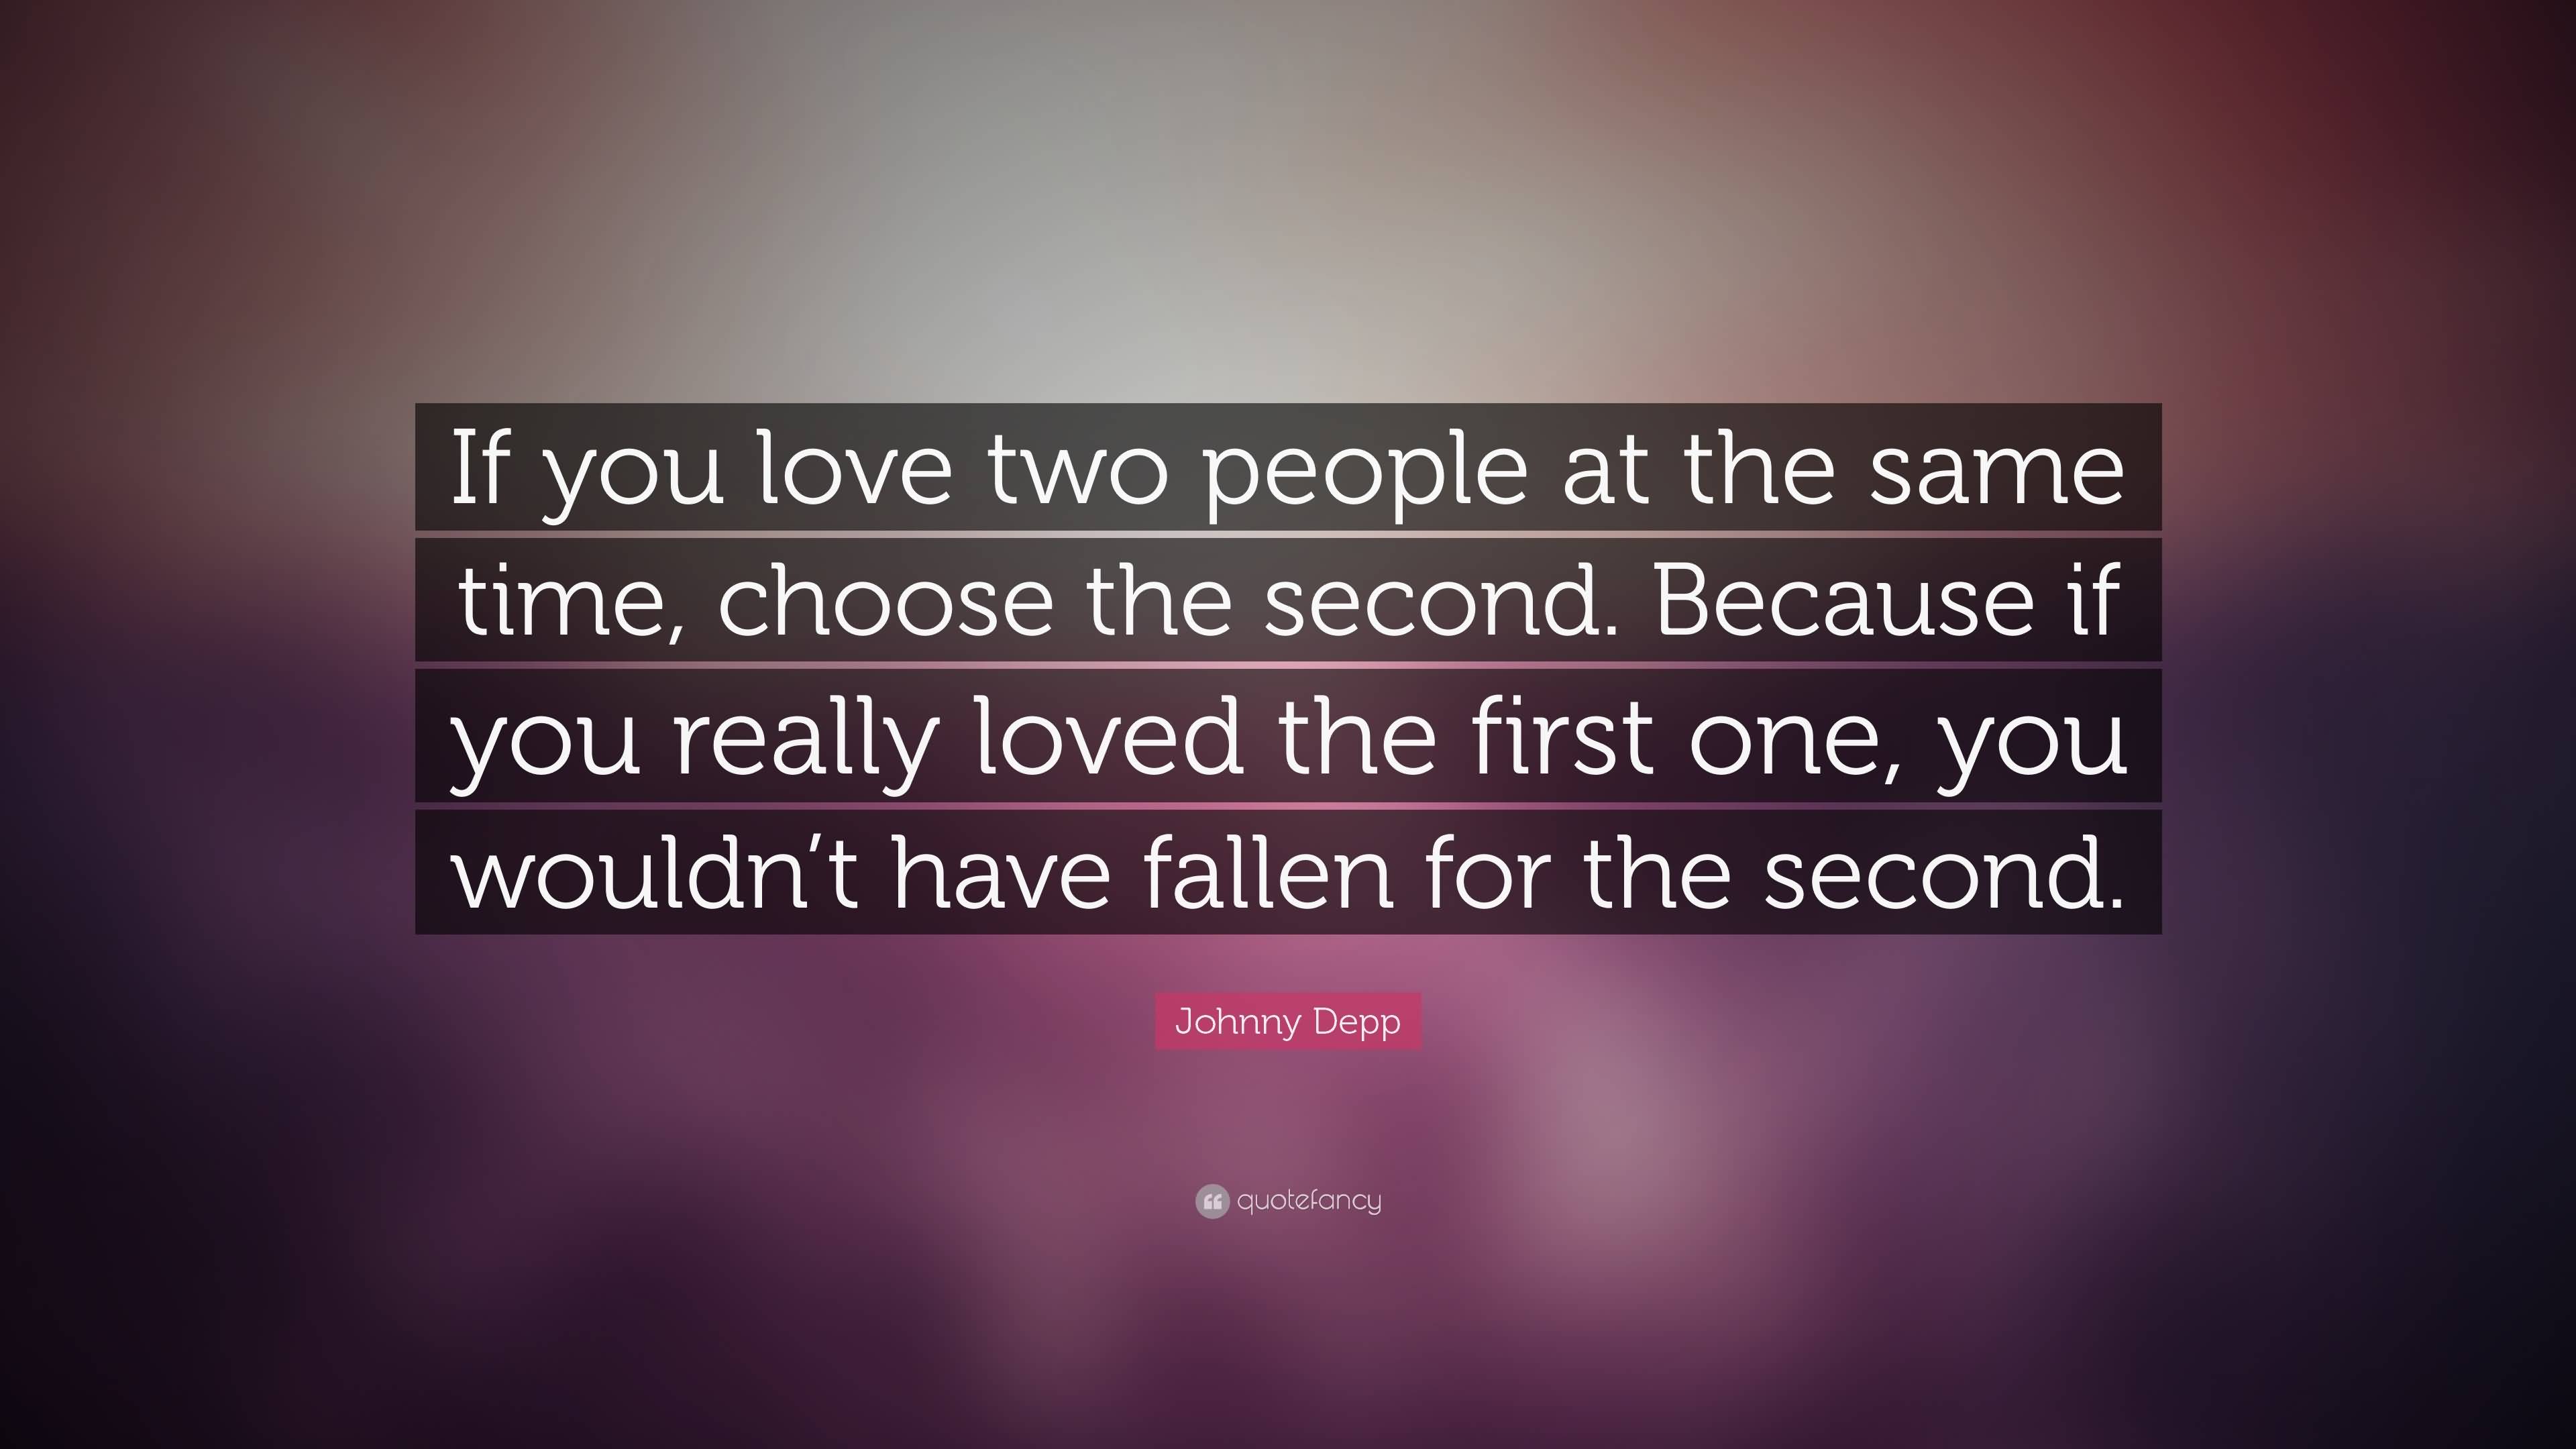 Love Is For Two Quotes Meme Image 15